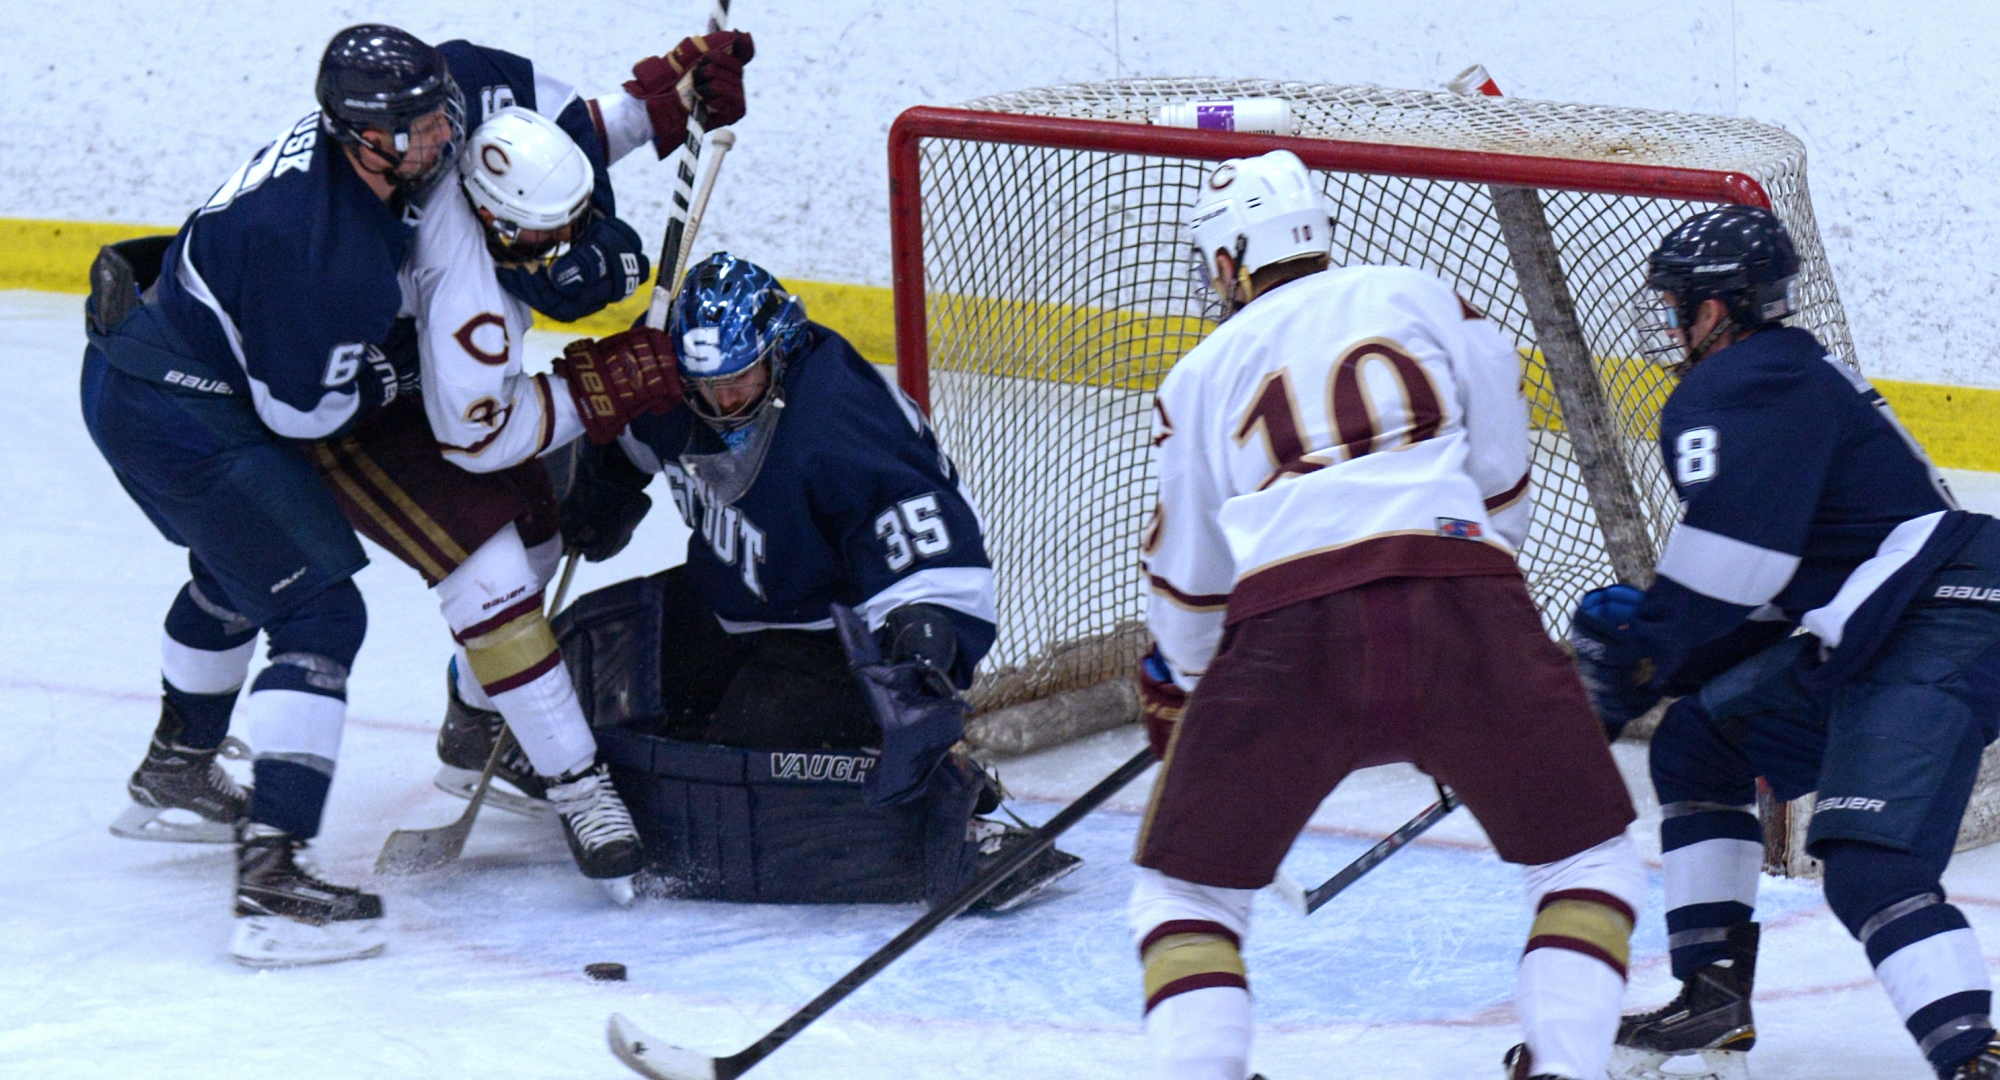 Junior Jon Grebosky gets put in a head lock as he drives towards the net during the Cobbers' 6-1 win over Wis.-Stout. Grebosky had two goals in the game.